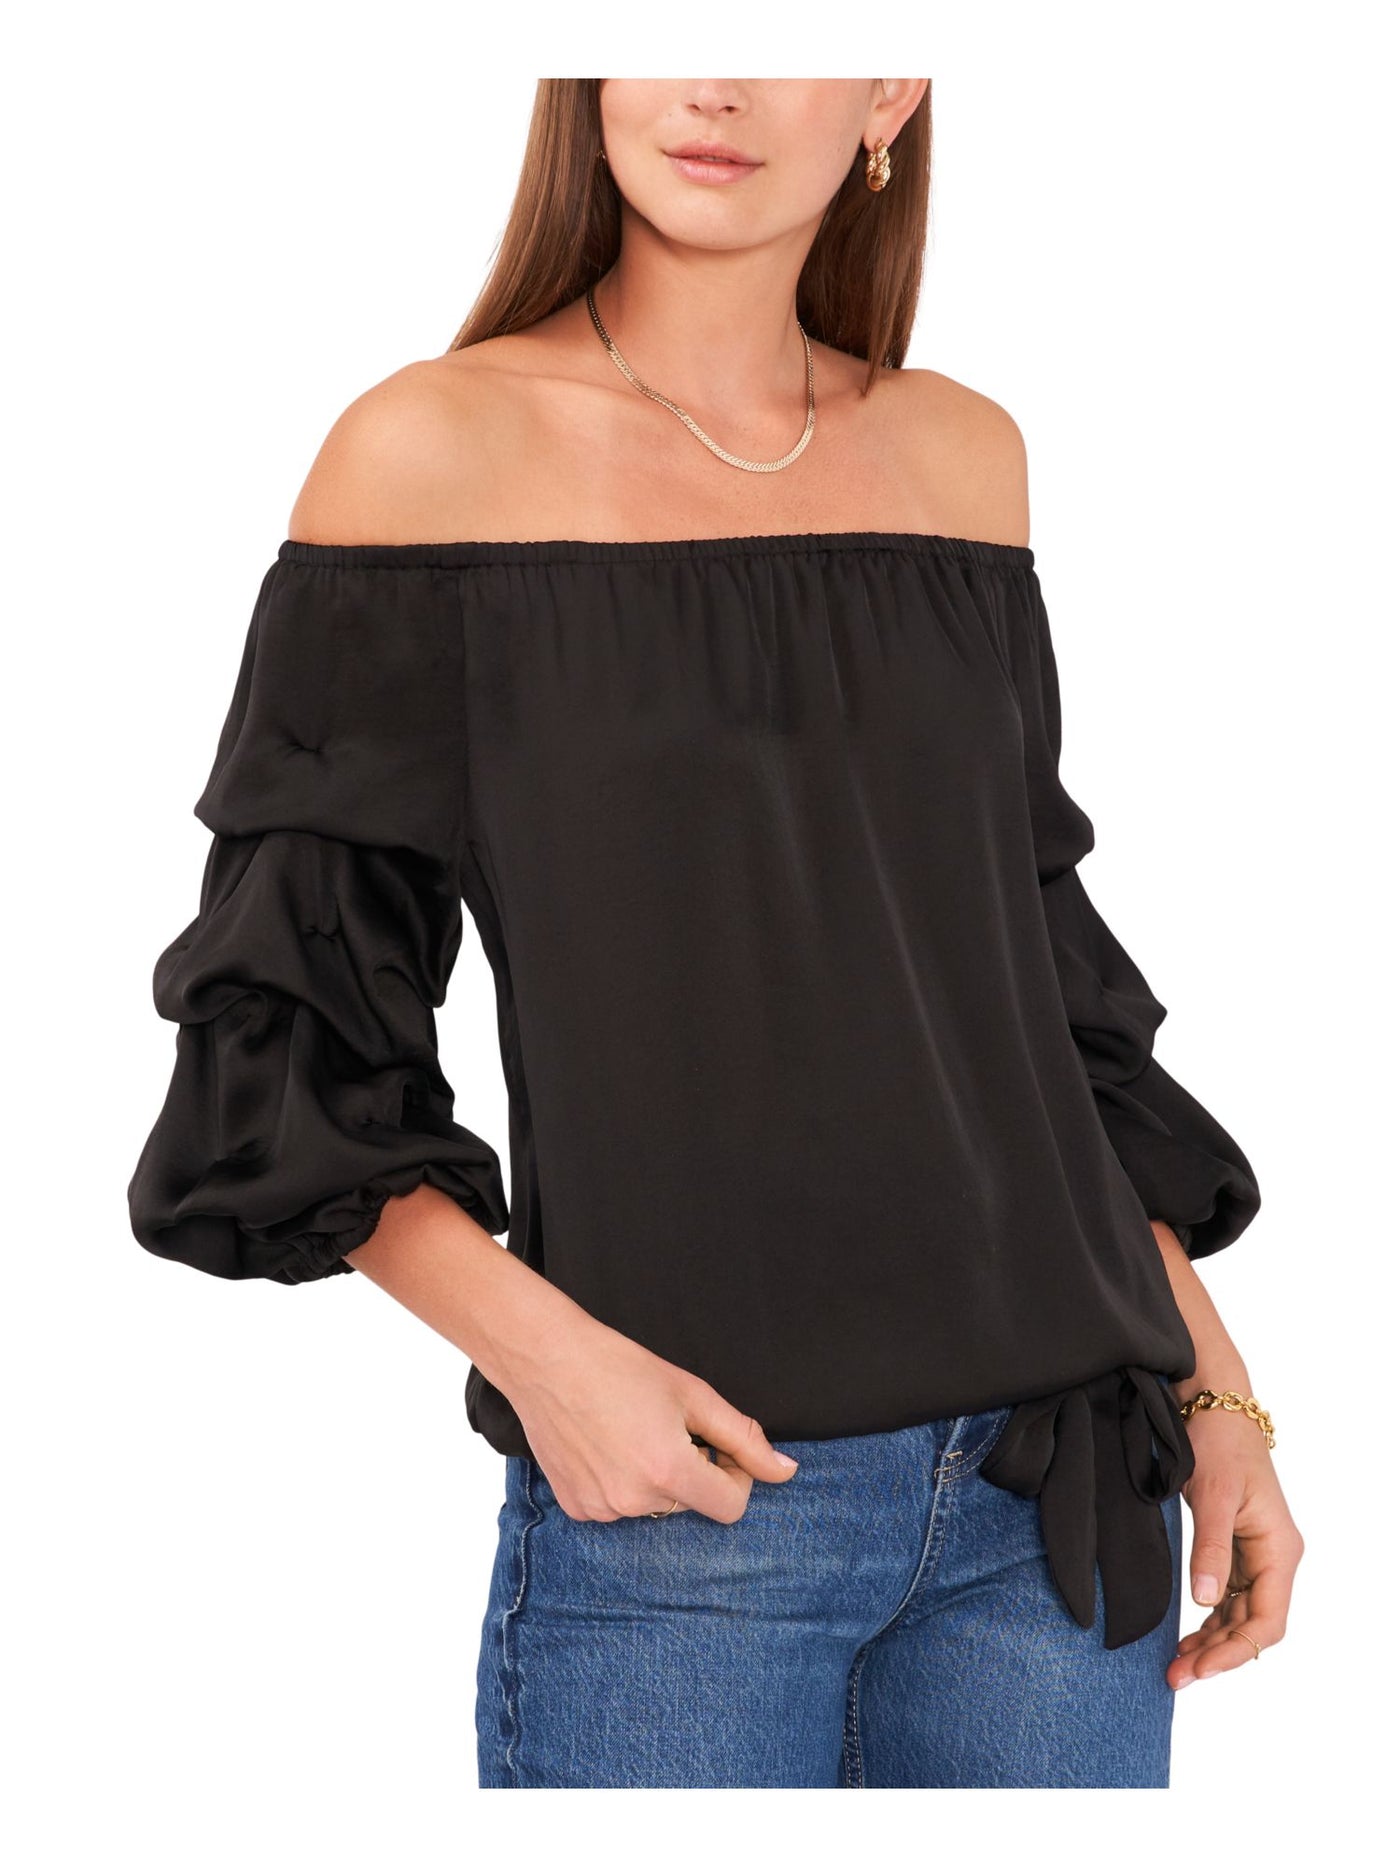 VINCE CAMUTO Womens Black Tie Ruched Lined Elasticized Sheer Balloon Sleeve Off Shoulder Cocktail Top S